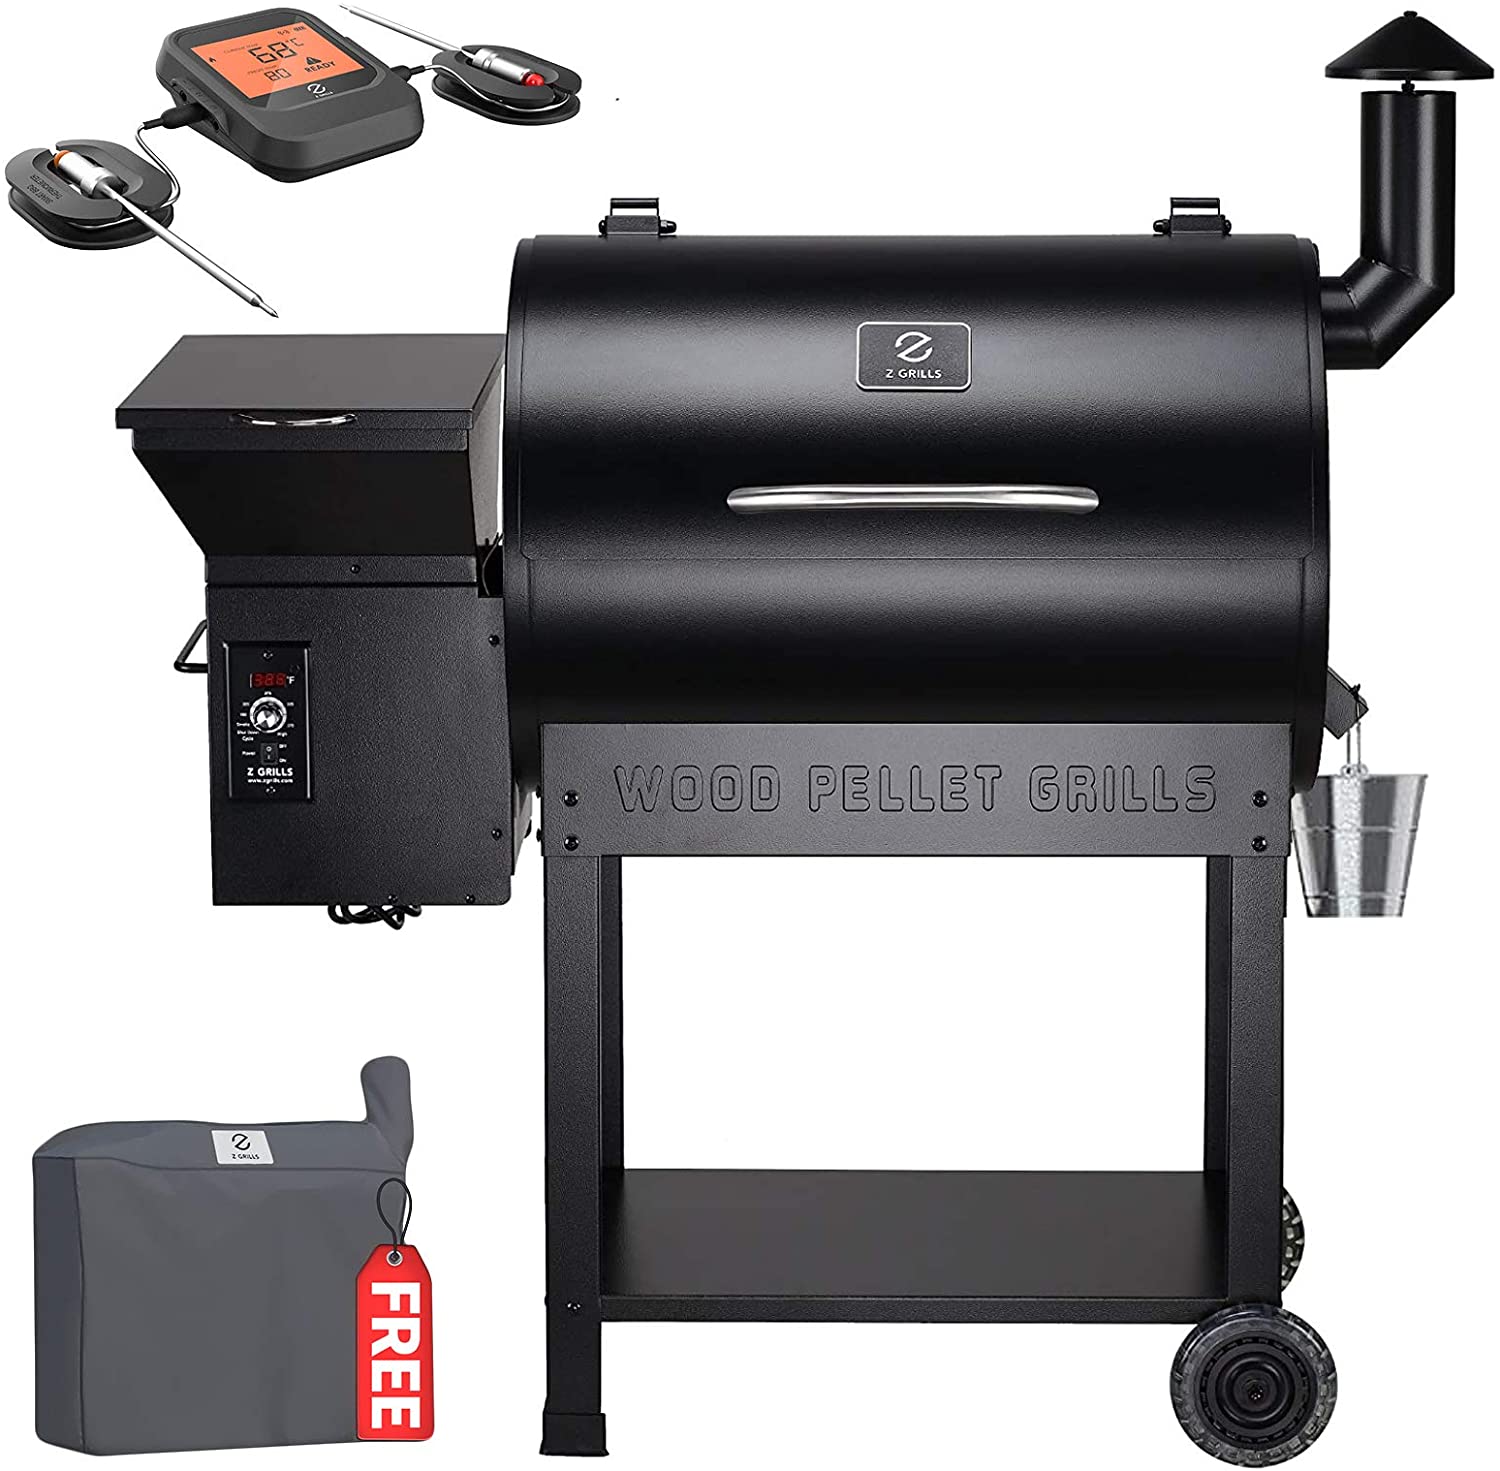 Z Grills 700 sq in Wood Pellet Barbecue Grill and Smoker Family Size 8 in 1 Smart BBQ Grill - image 1 of 8